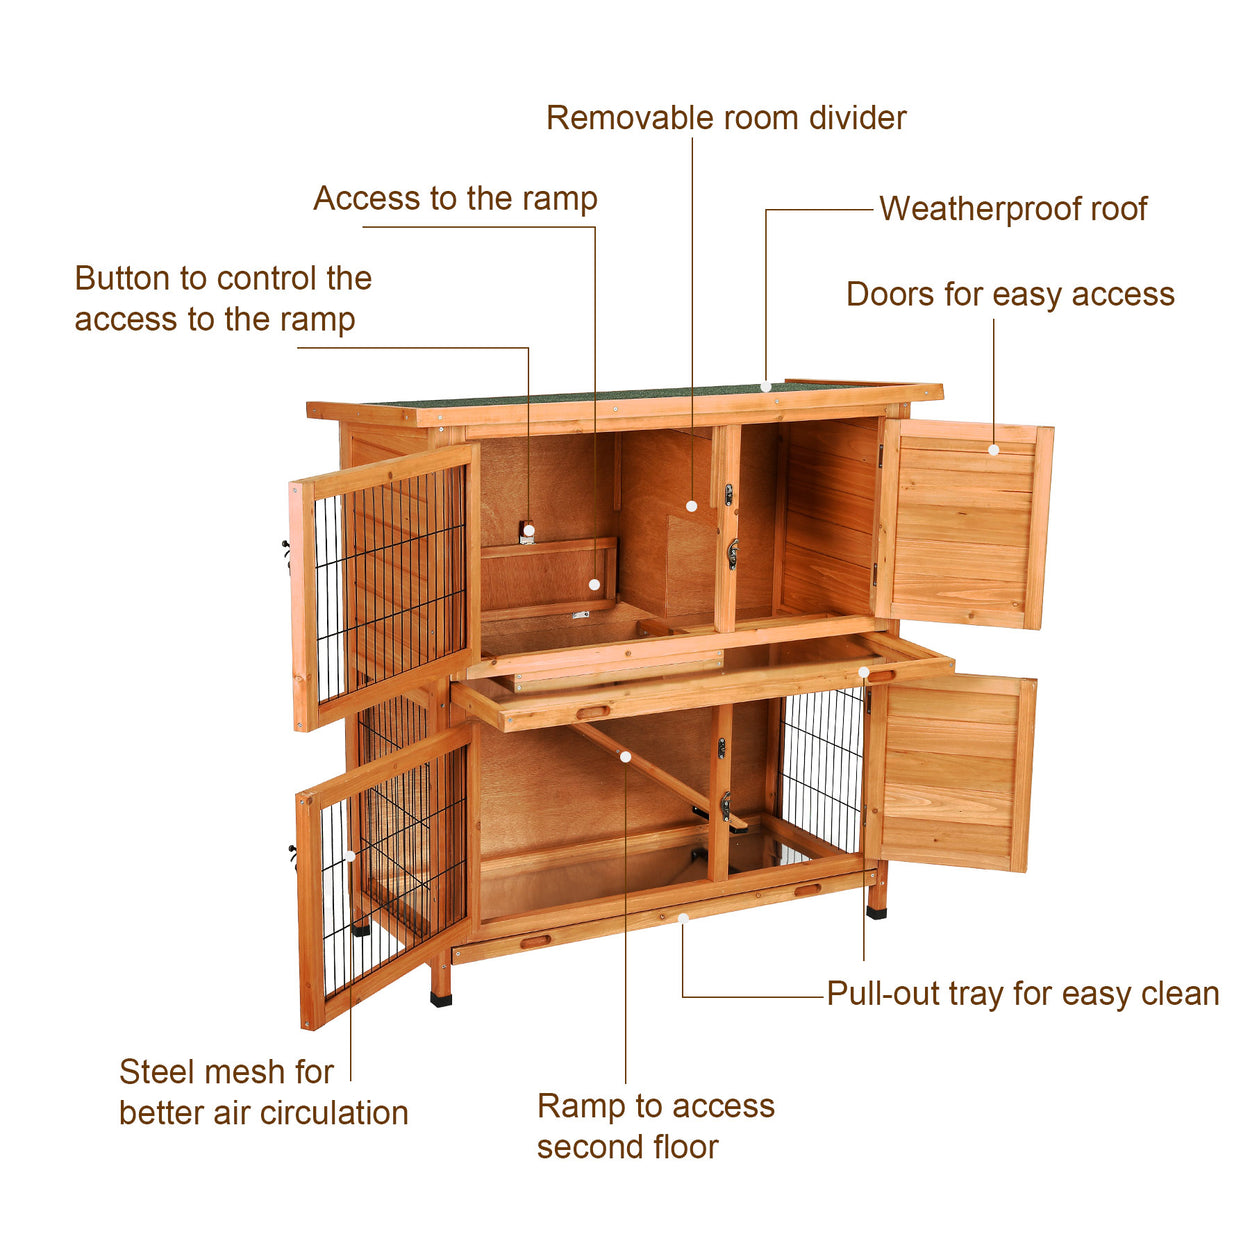 Clearance 2-Tier Outdoor Wooden Hutch